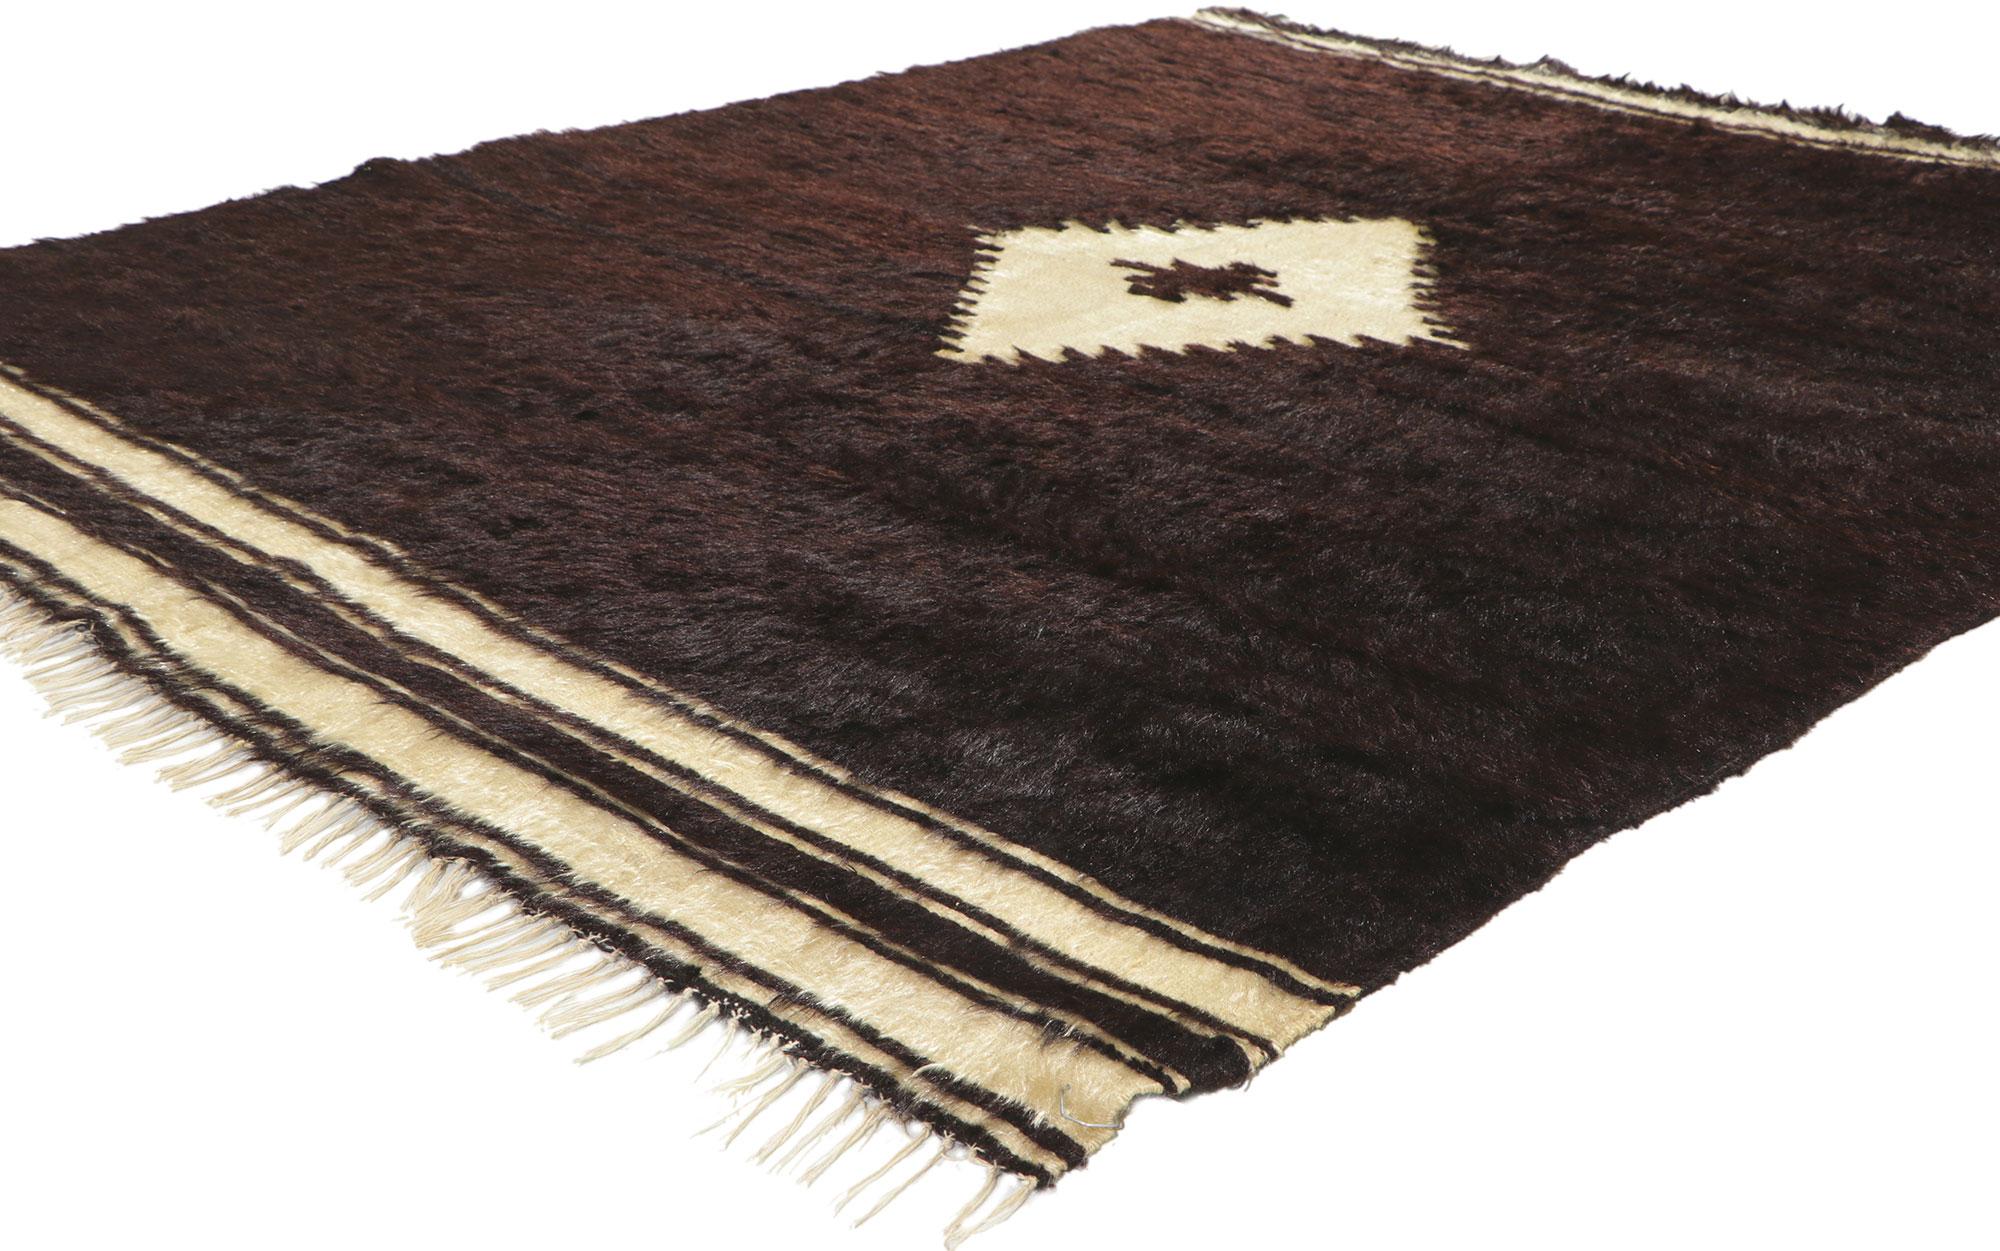 53849 Vintage Turkish Angora Wool Blanket Kilim rug, 05'01 x 06'01. With its shaggy pile, incredible detail and texture, this handwoven Turkish angora kilim rug is a captivating vision of woven beauty. The eye-catching geometric design and earthy